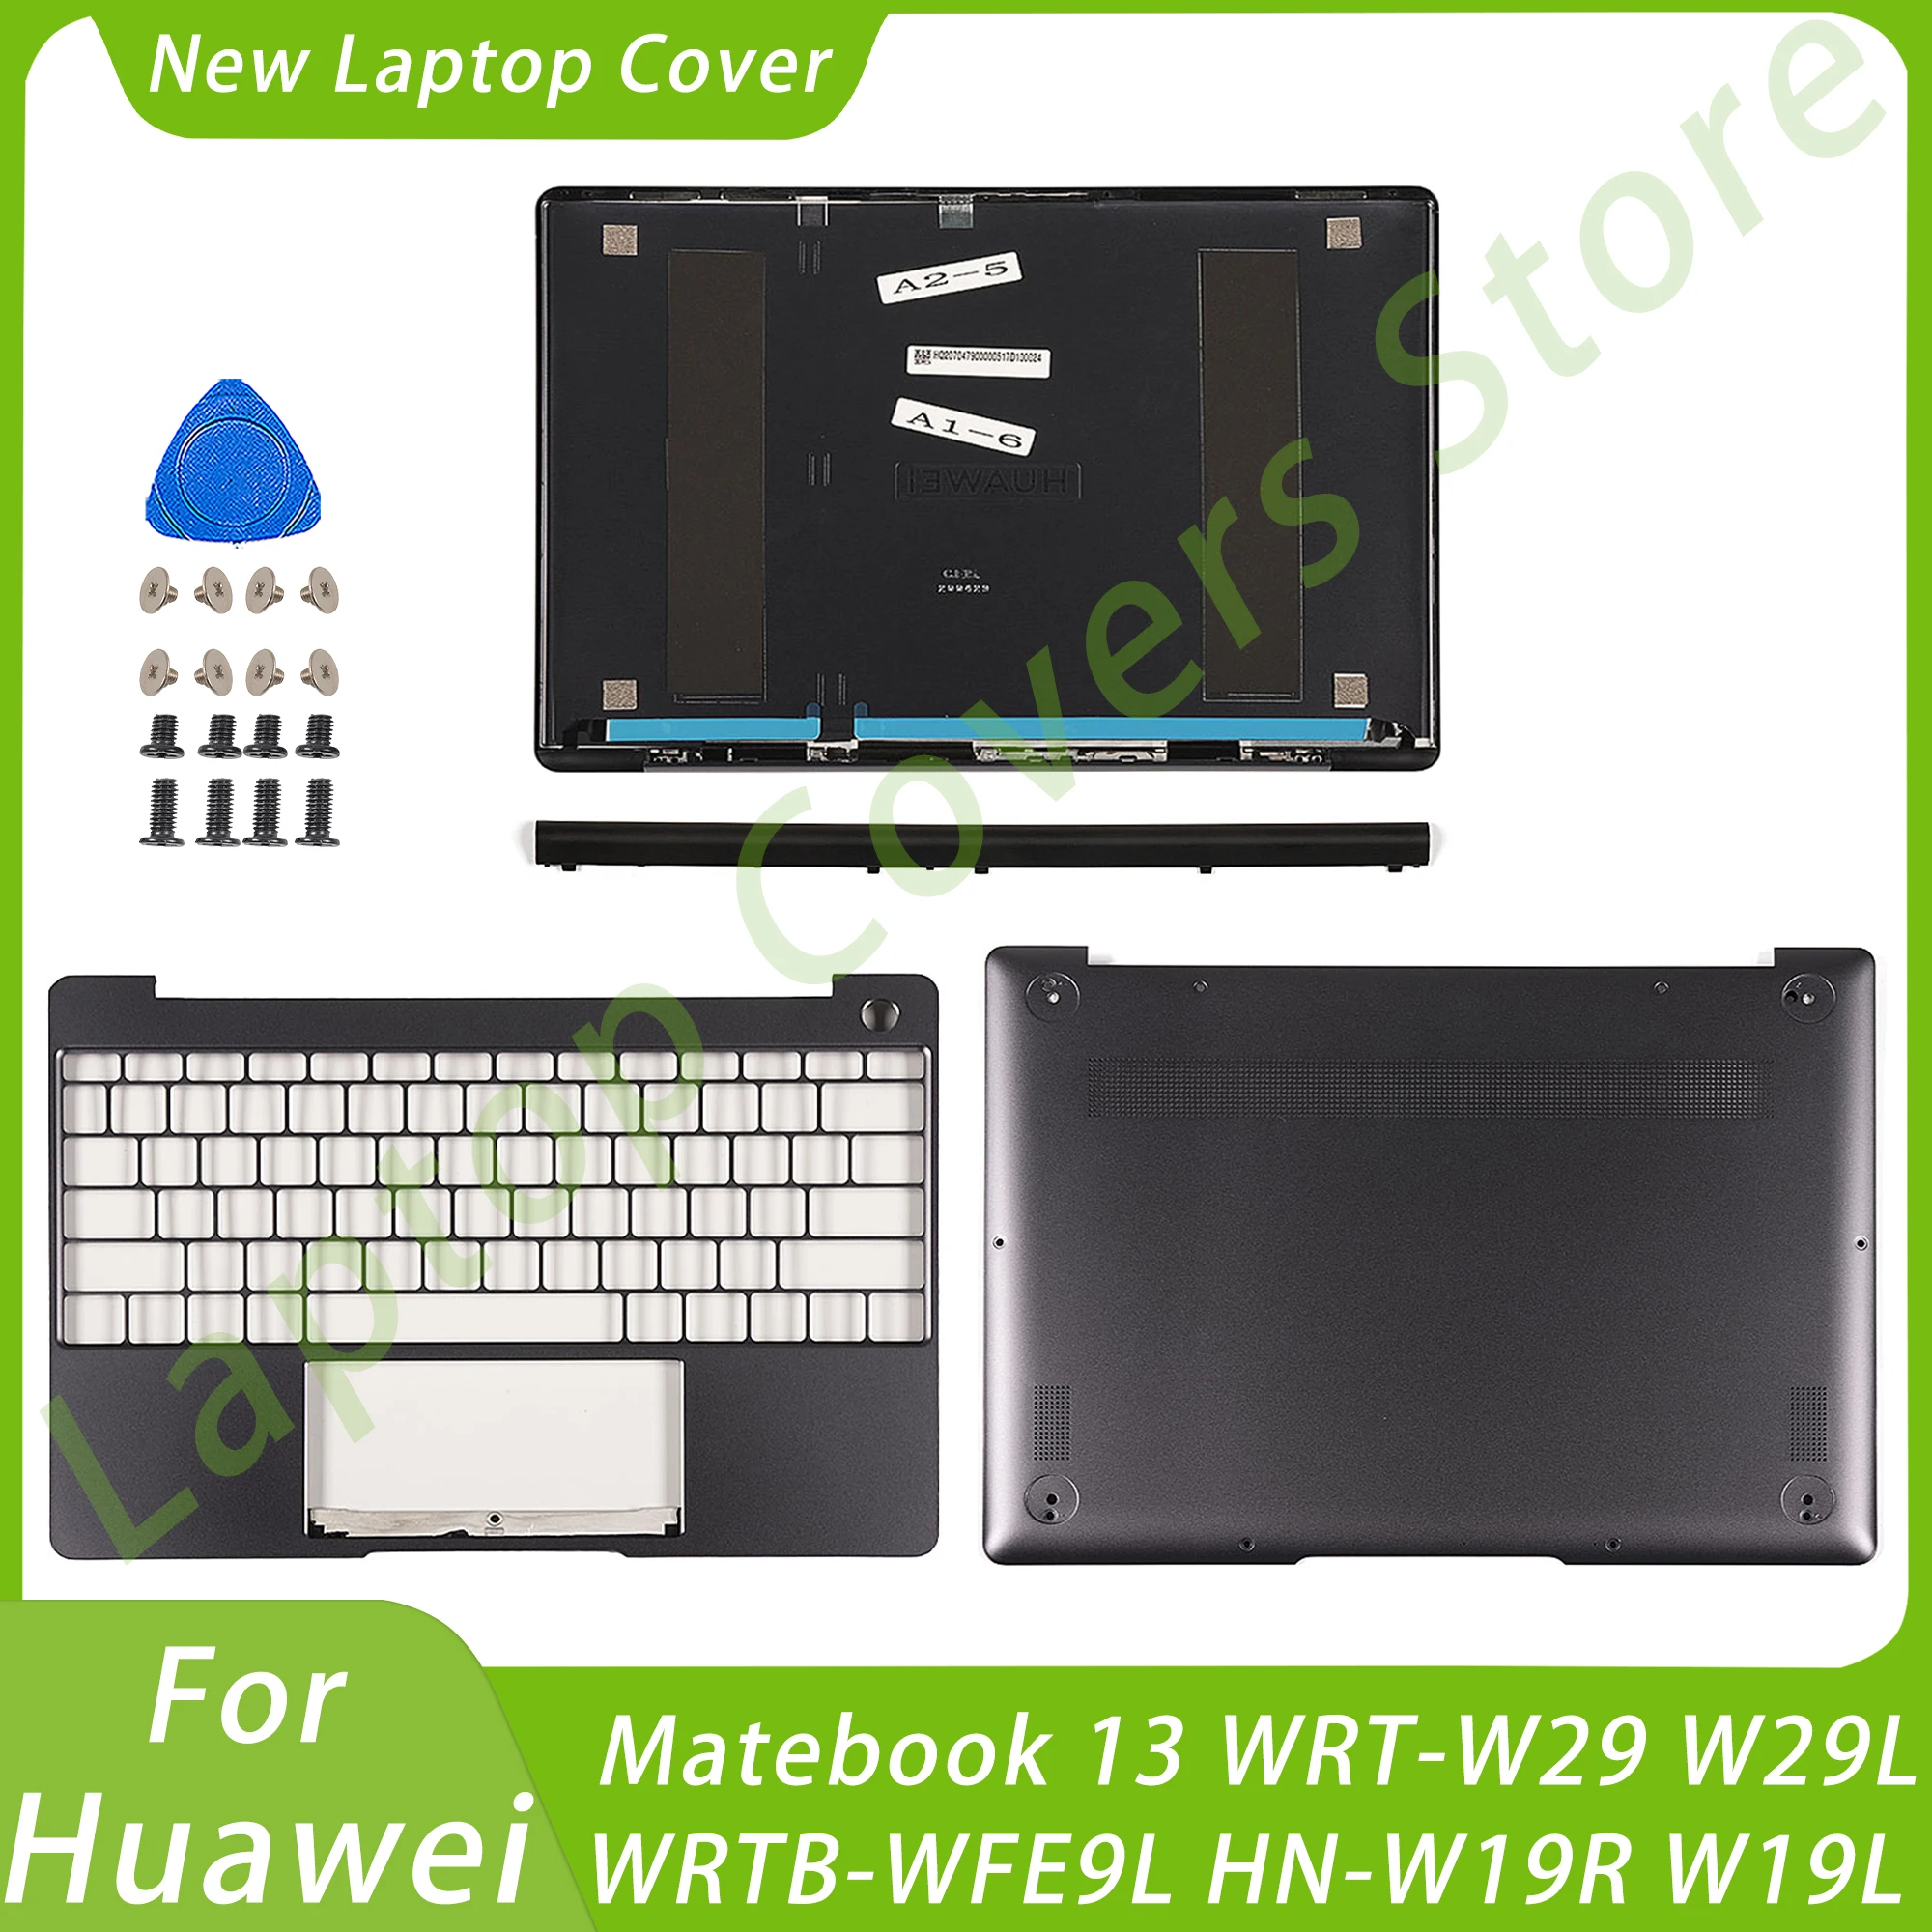 

New For Huawei Matebook 13 WRT-W29 W29L WRTB-WFE9L HN-W19R W19L Gray LCD Back Cover Palmrest Bottom Case HingeCover Laptop Parts